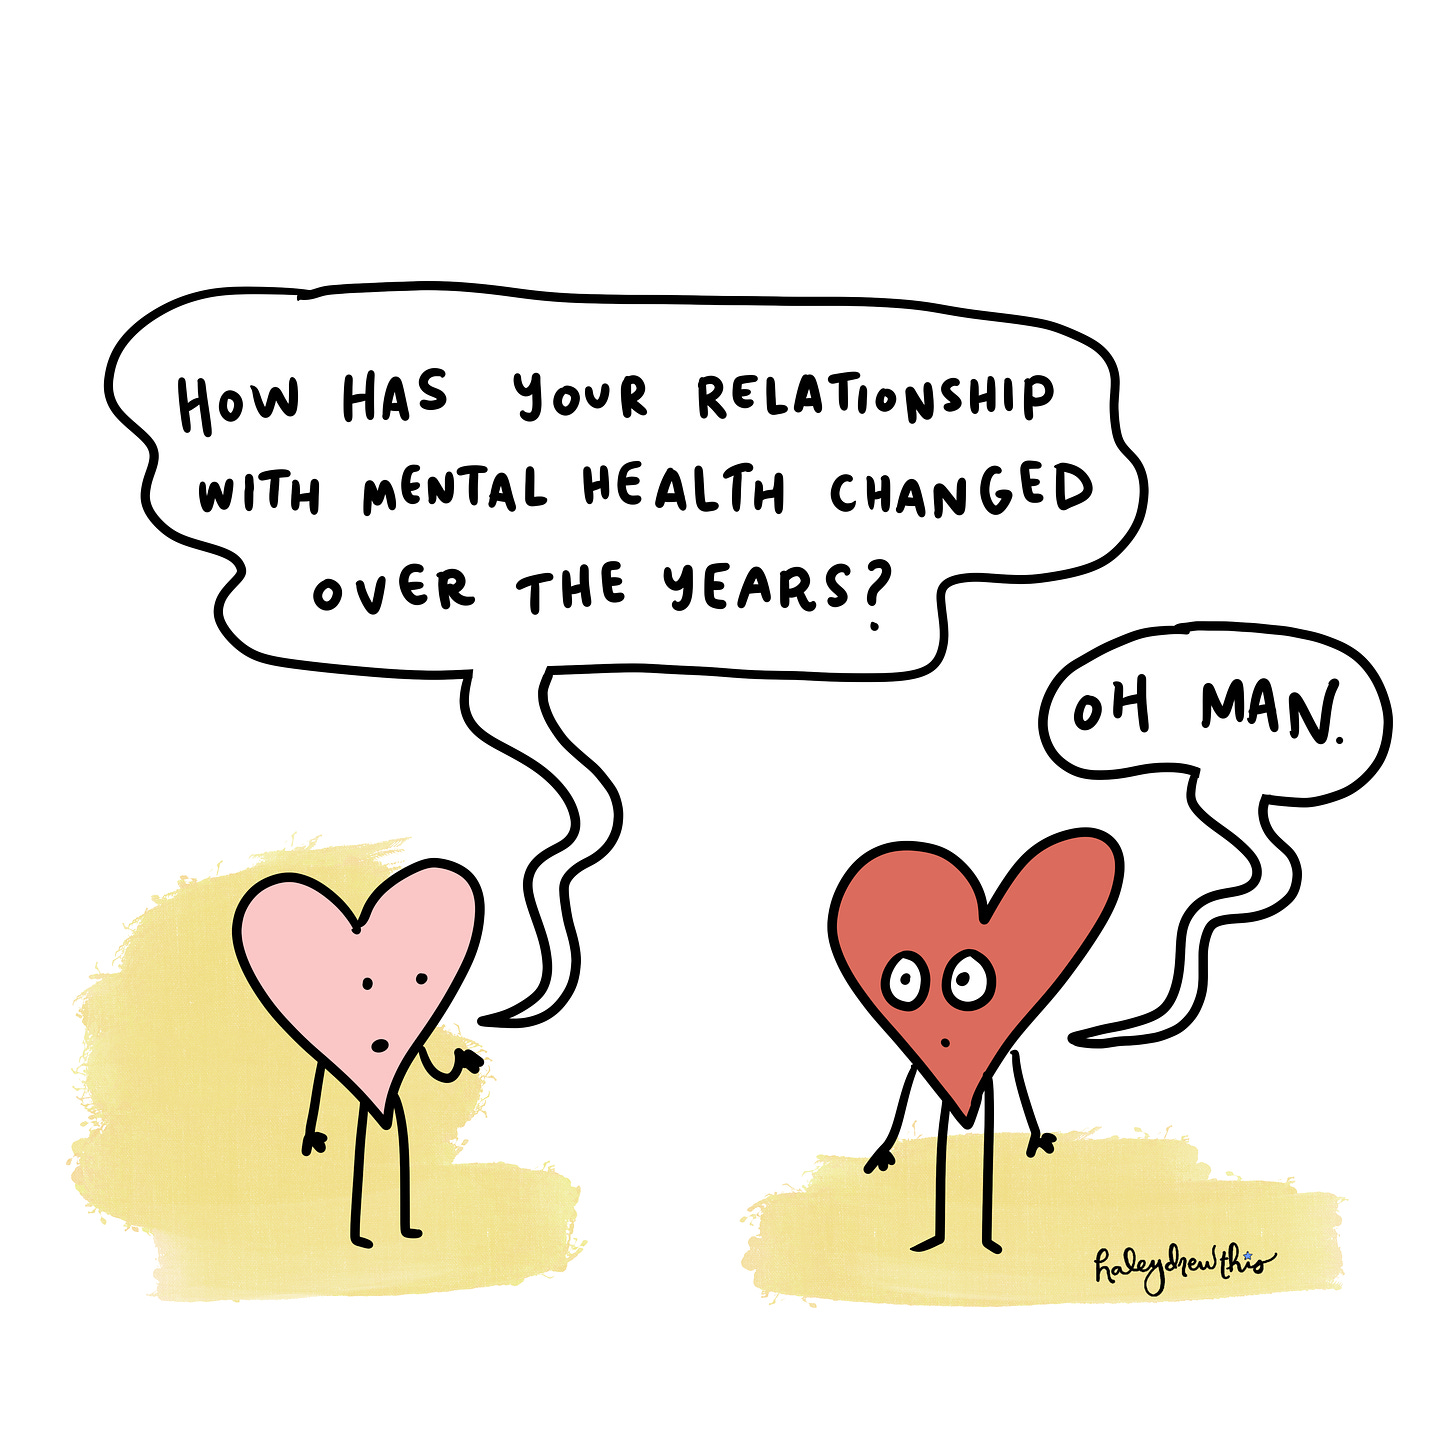 How has your relationship with mental health and your understanding of it changed?